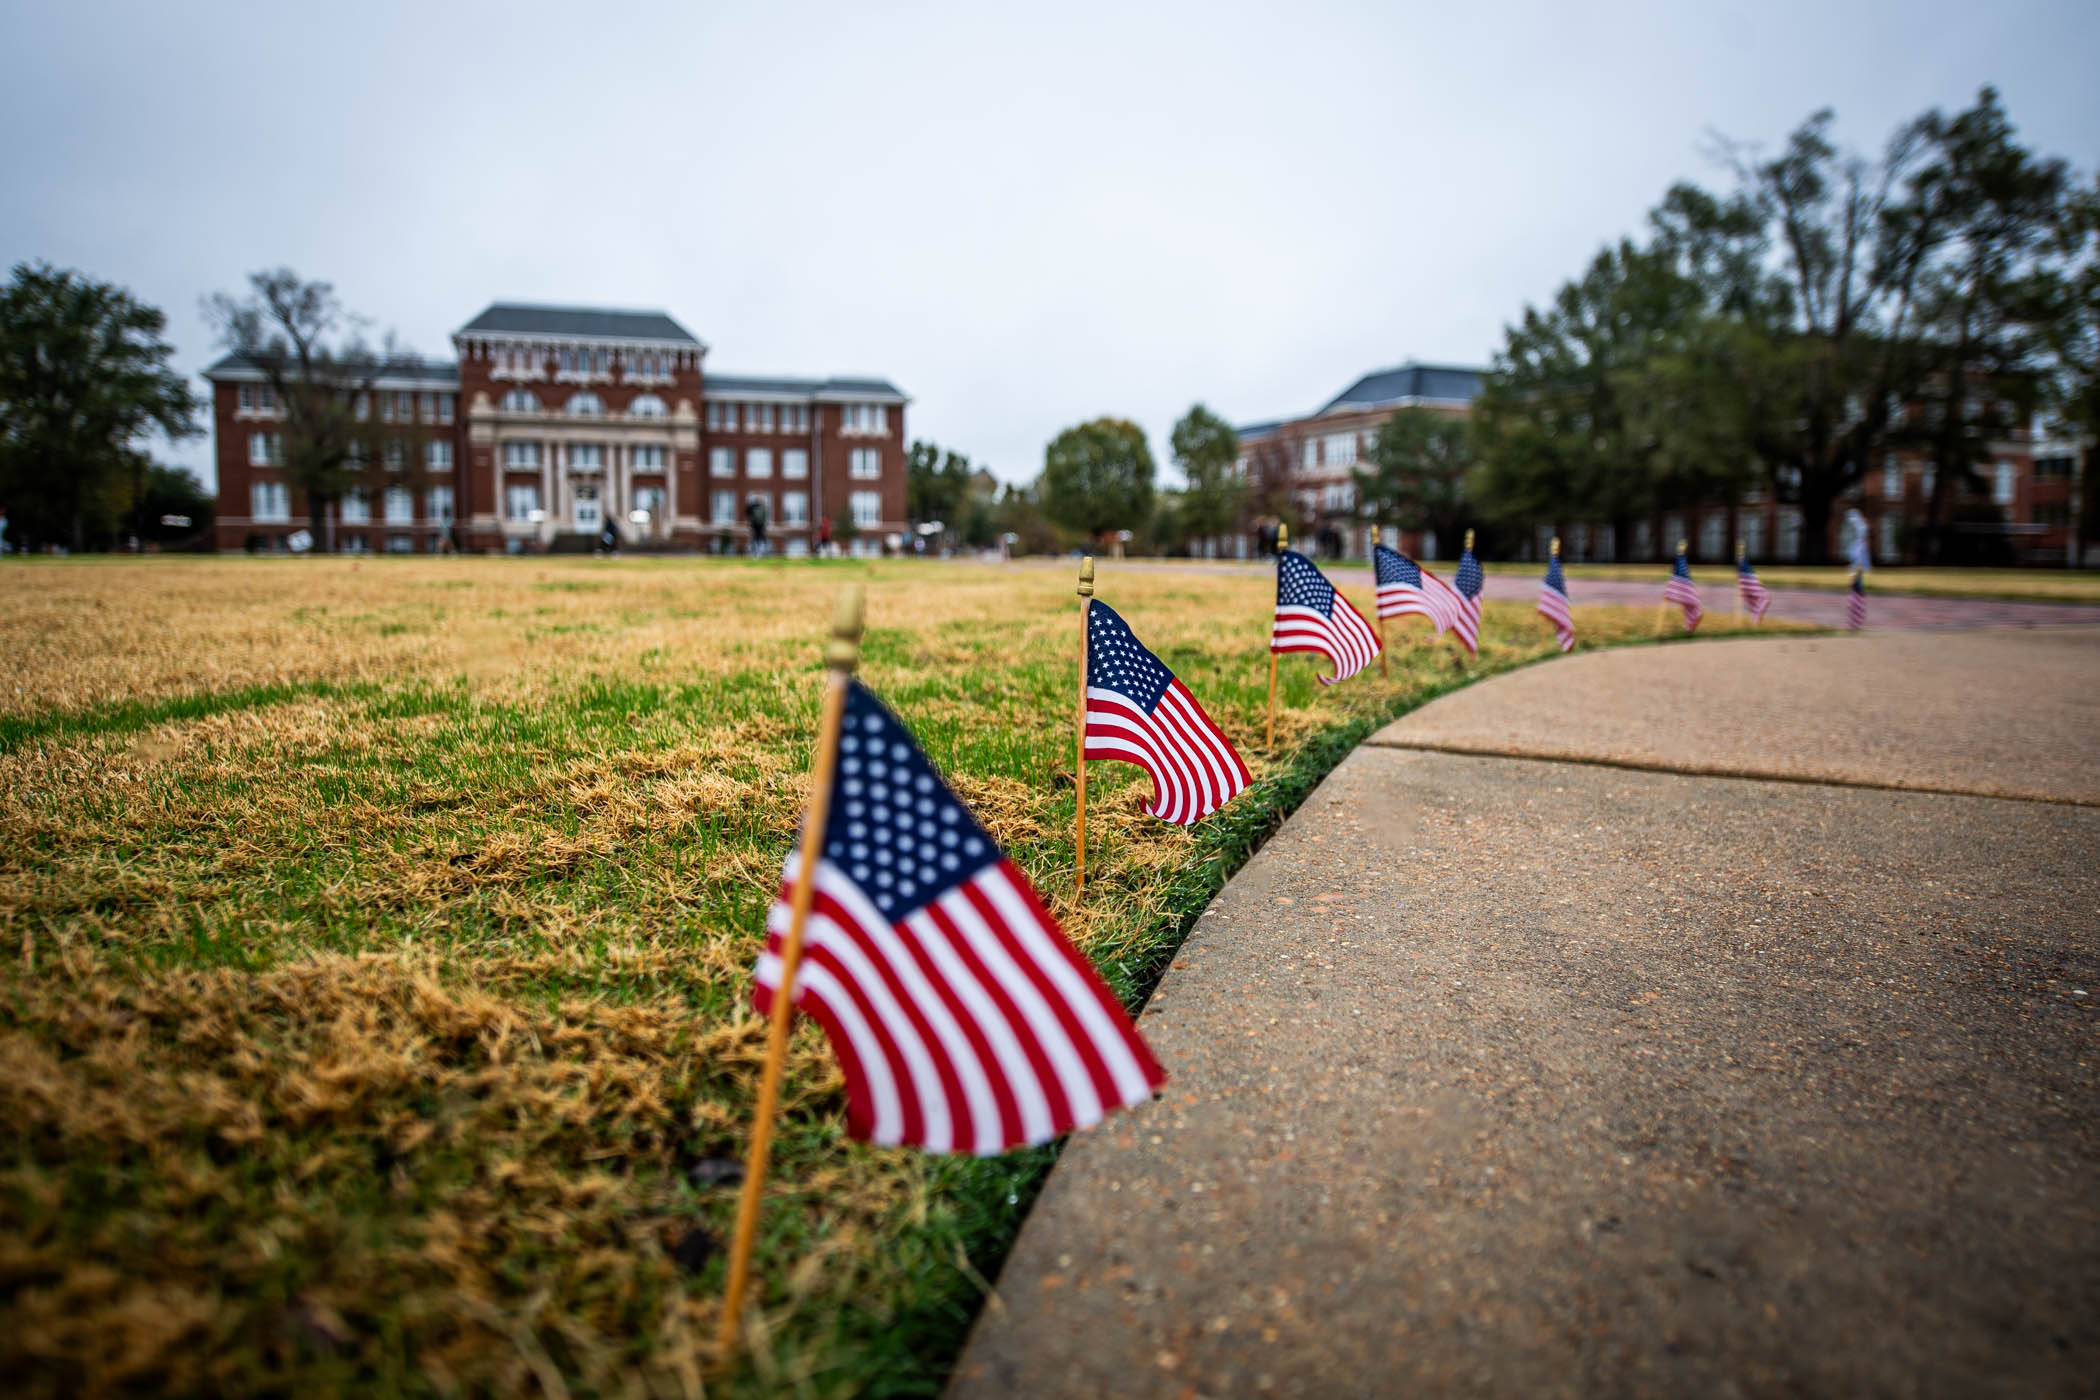 As flags fly along the sidewalks of Mississippi State’s Drill Field—the original main lawn where military cadets practiced formations--the university thanks the men and women who have selflessly served this country for generations.